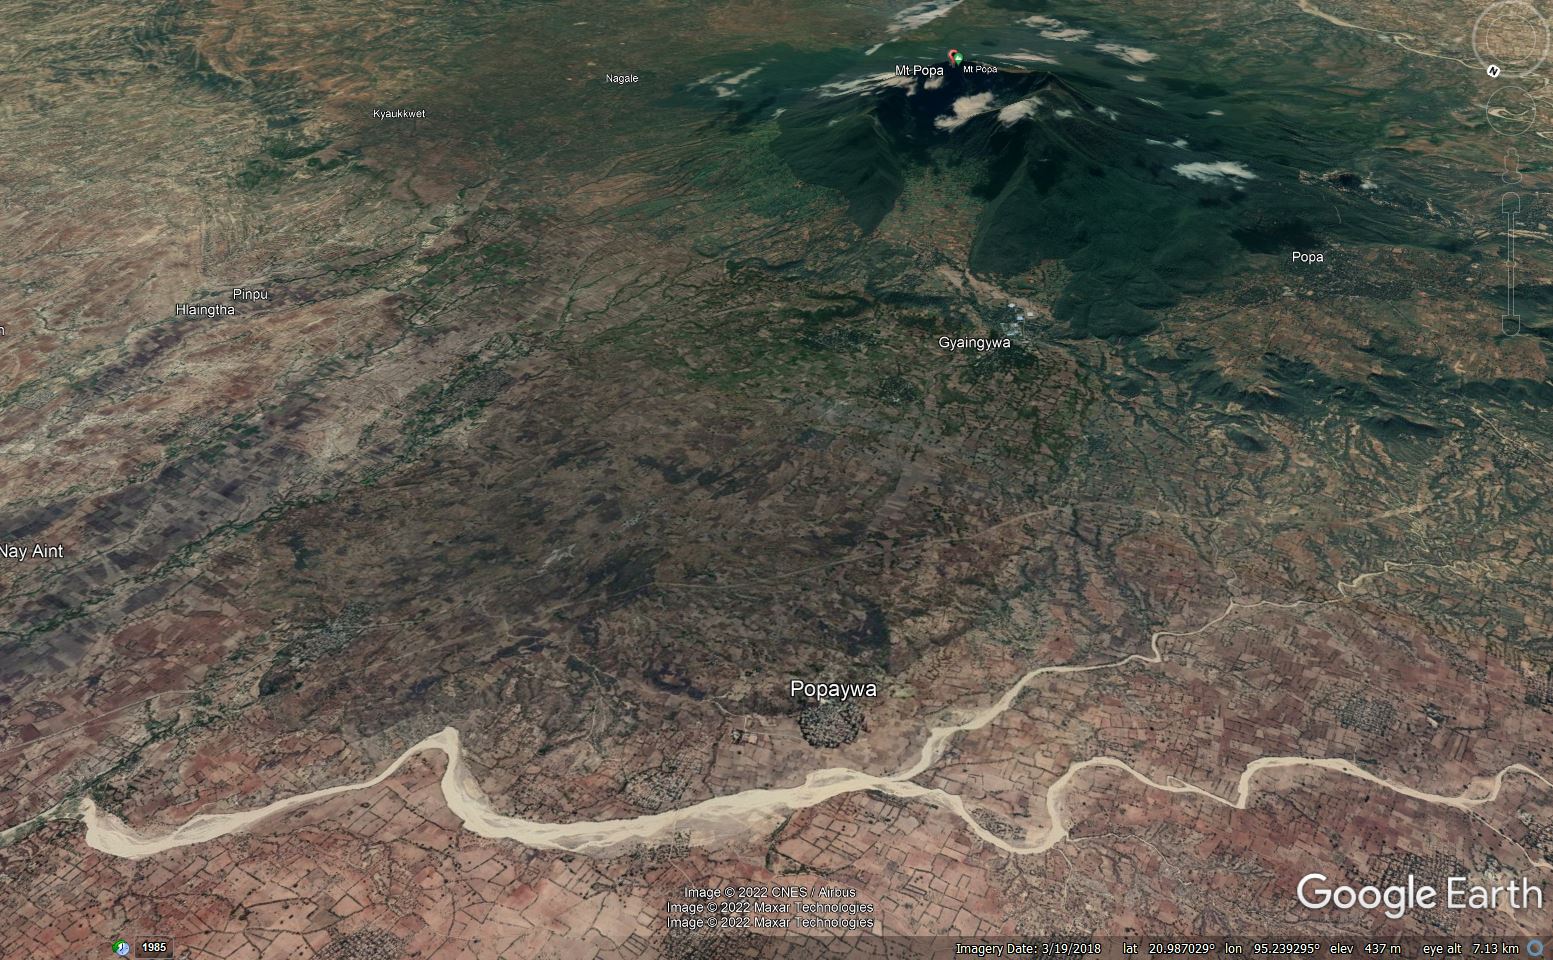 Google Earth image of the aftermath of the flank collapse at Mount Popa in Myanmar.